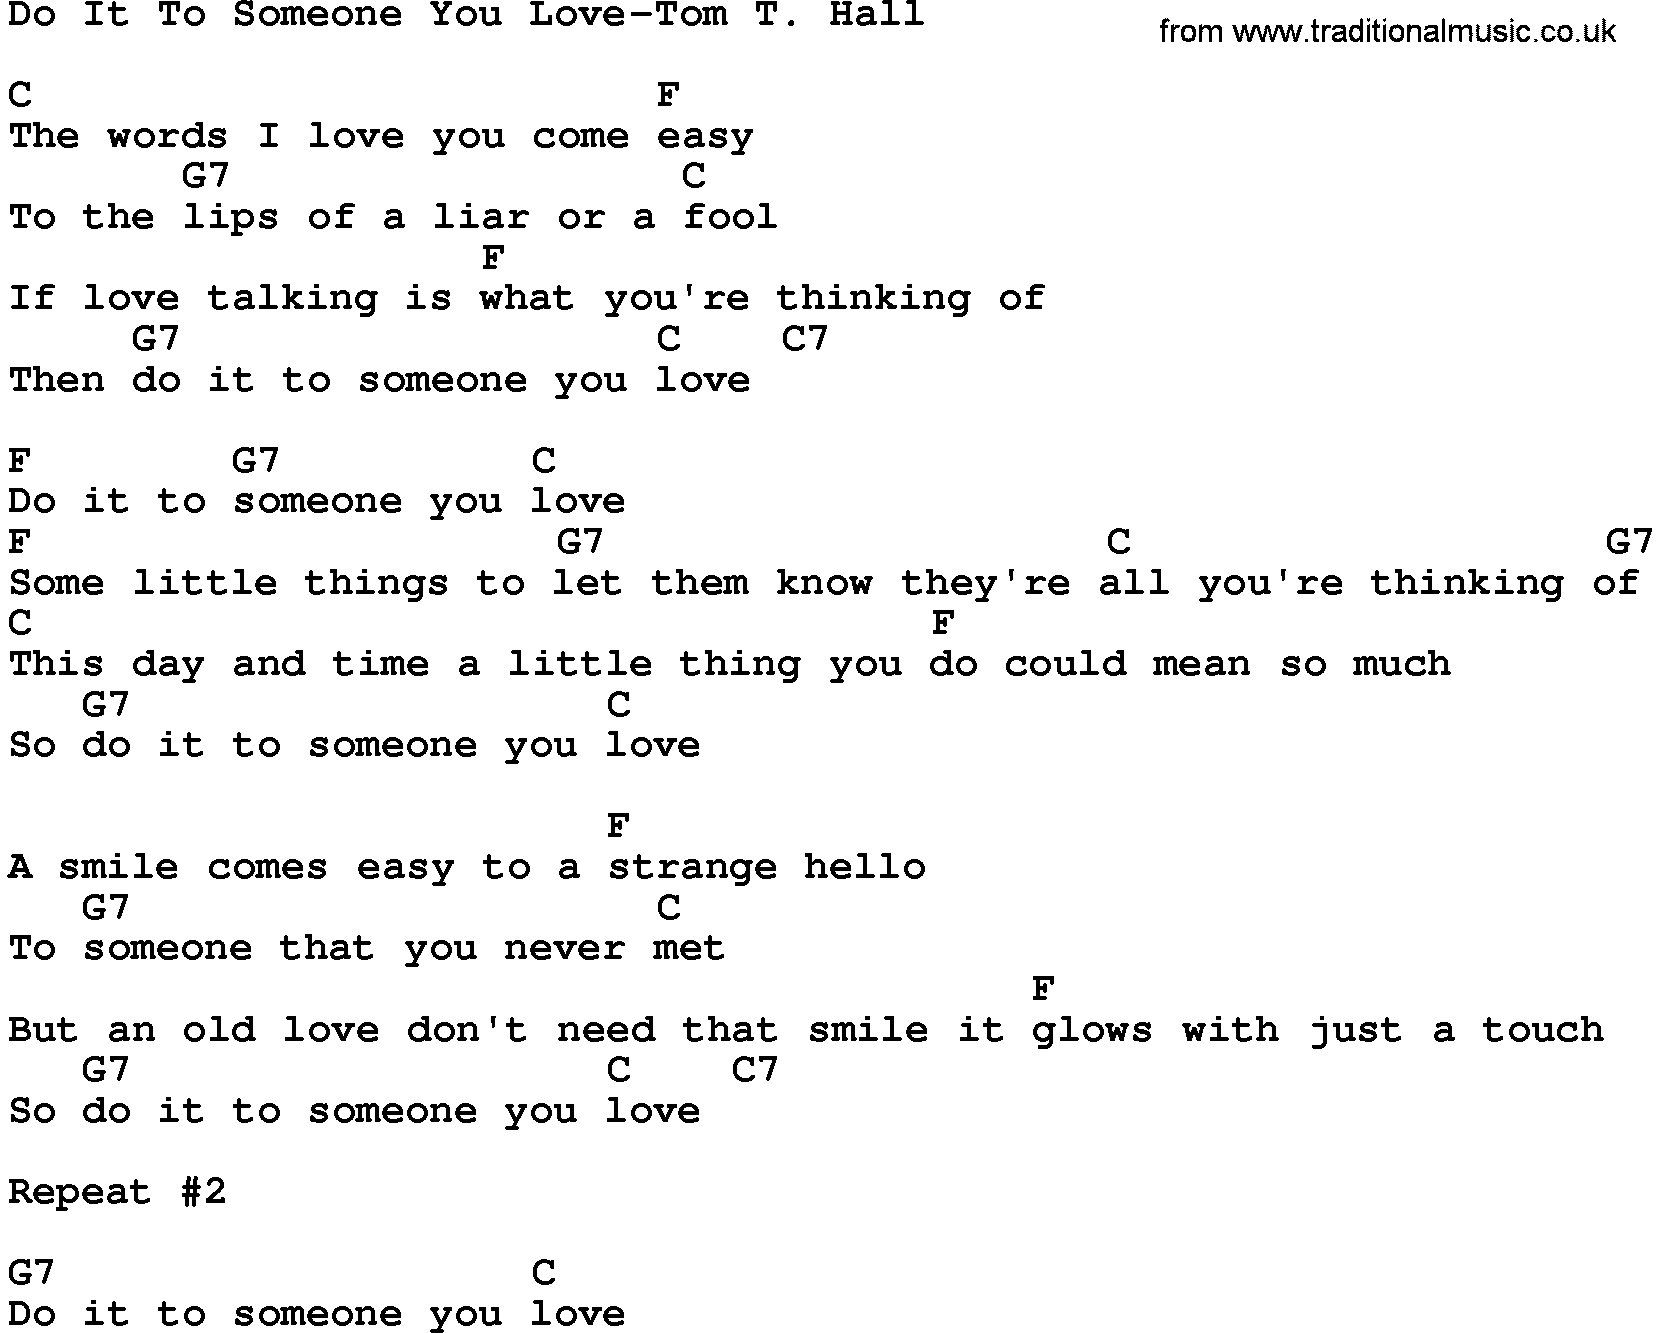 Country music song: Do It To Someone You Love-Tom T Hall lyrics and chords